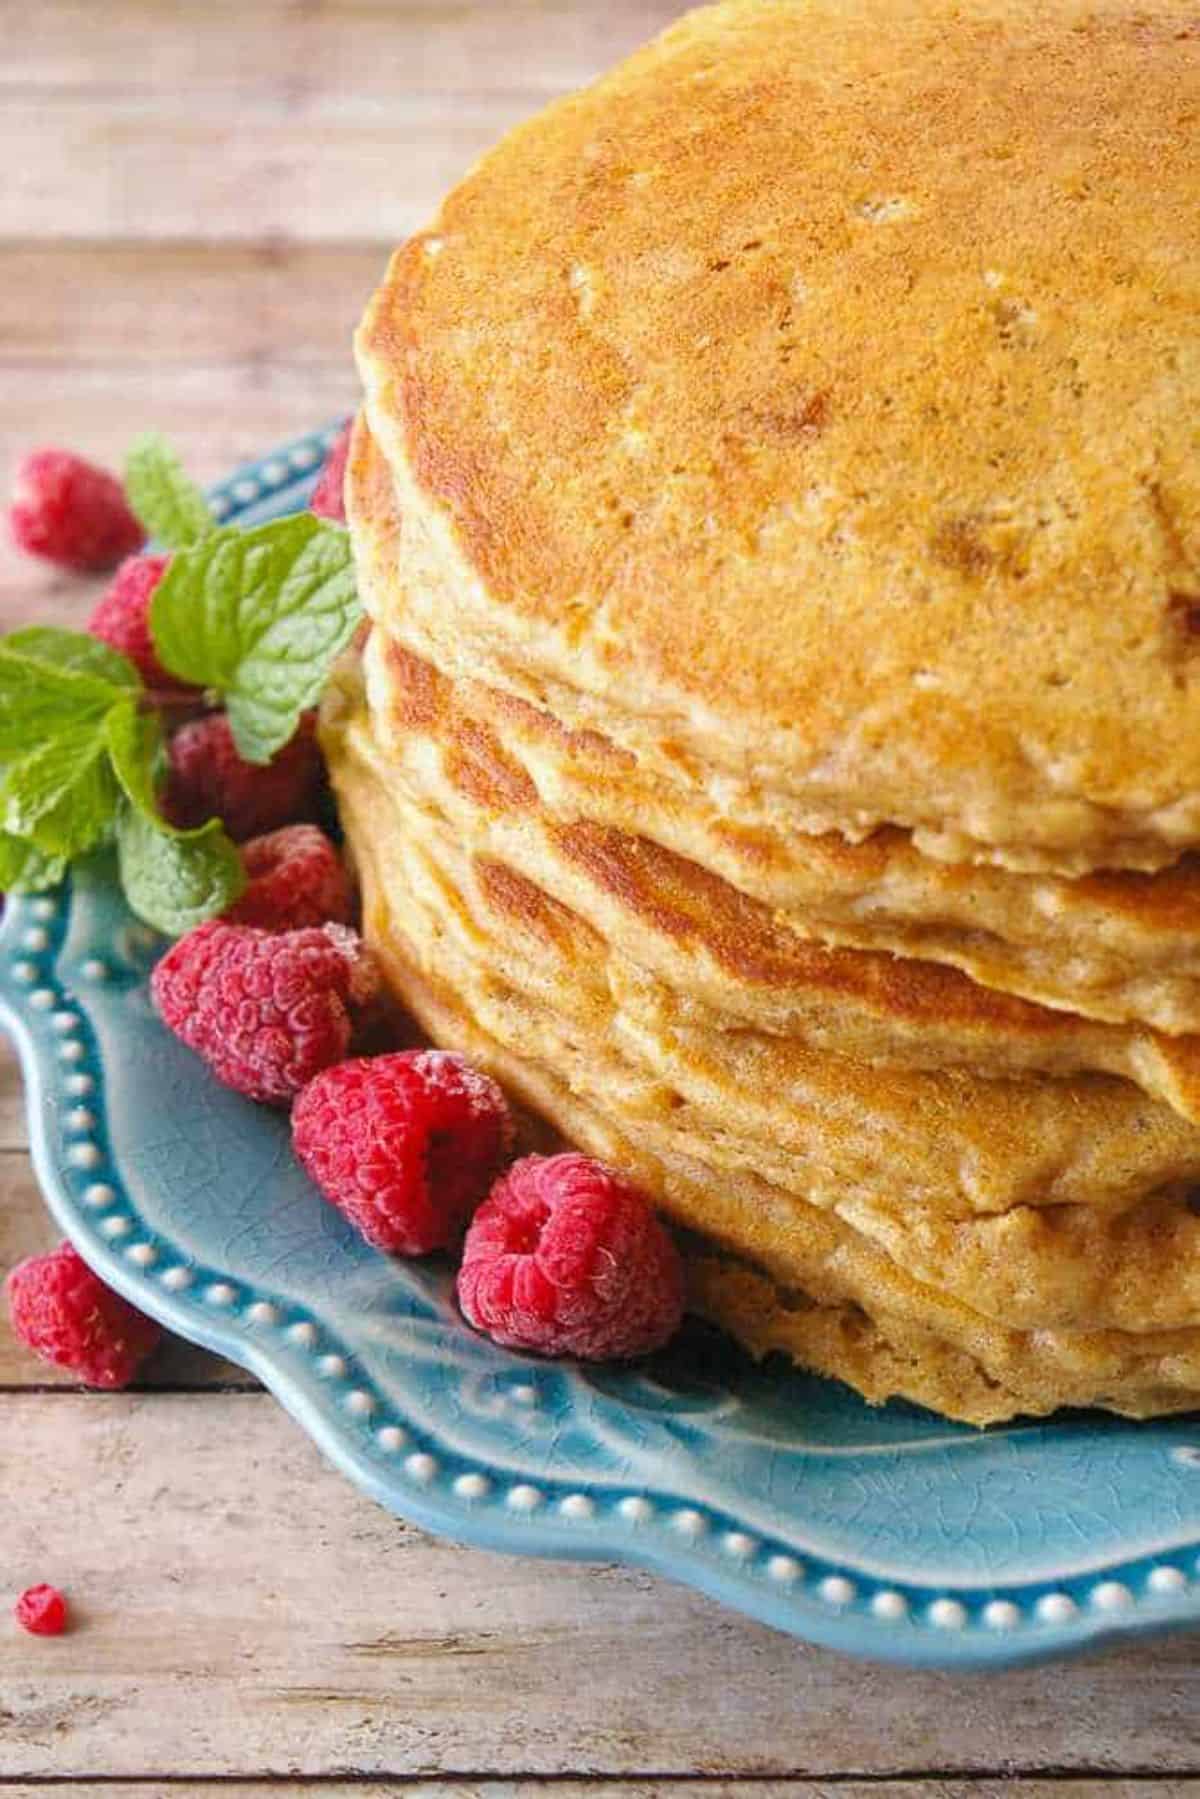 A stack of Whole Wheat Oatmeal Pancakes on a blue plate.